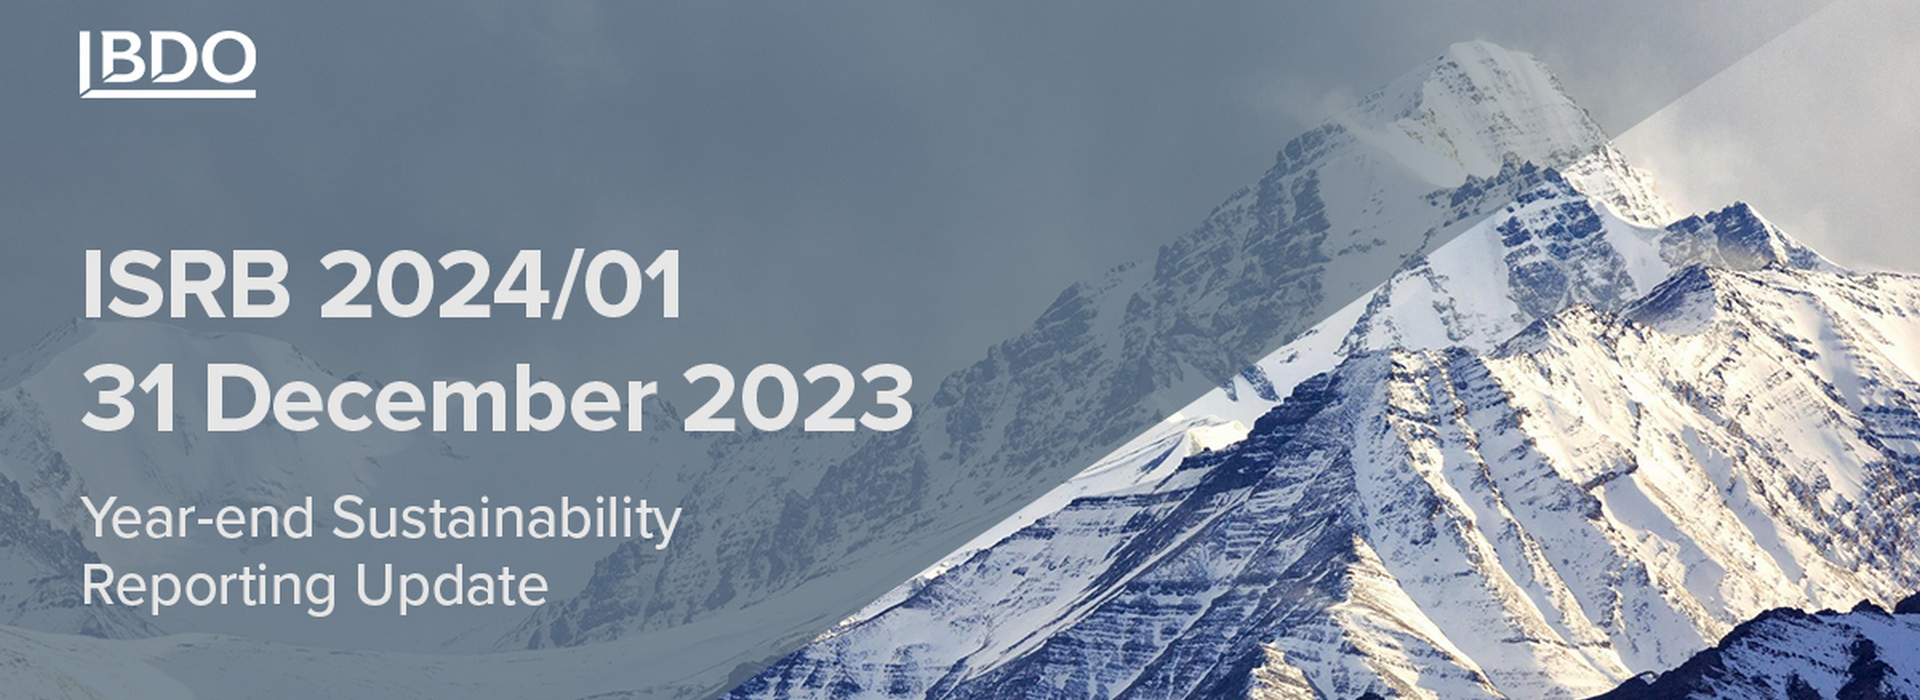 ISRB 2024/01 31 December 2023 Year-end Sustainability Reporting Update